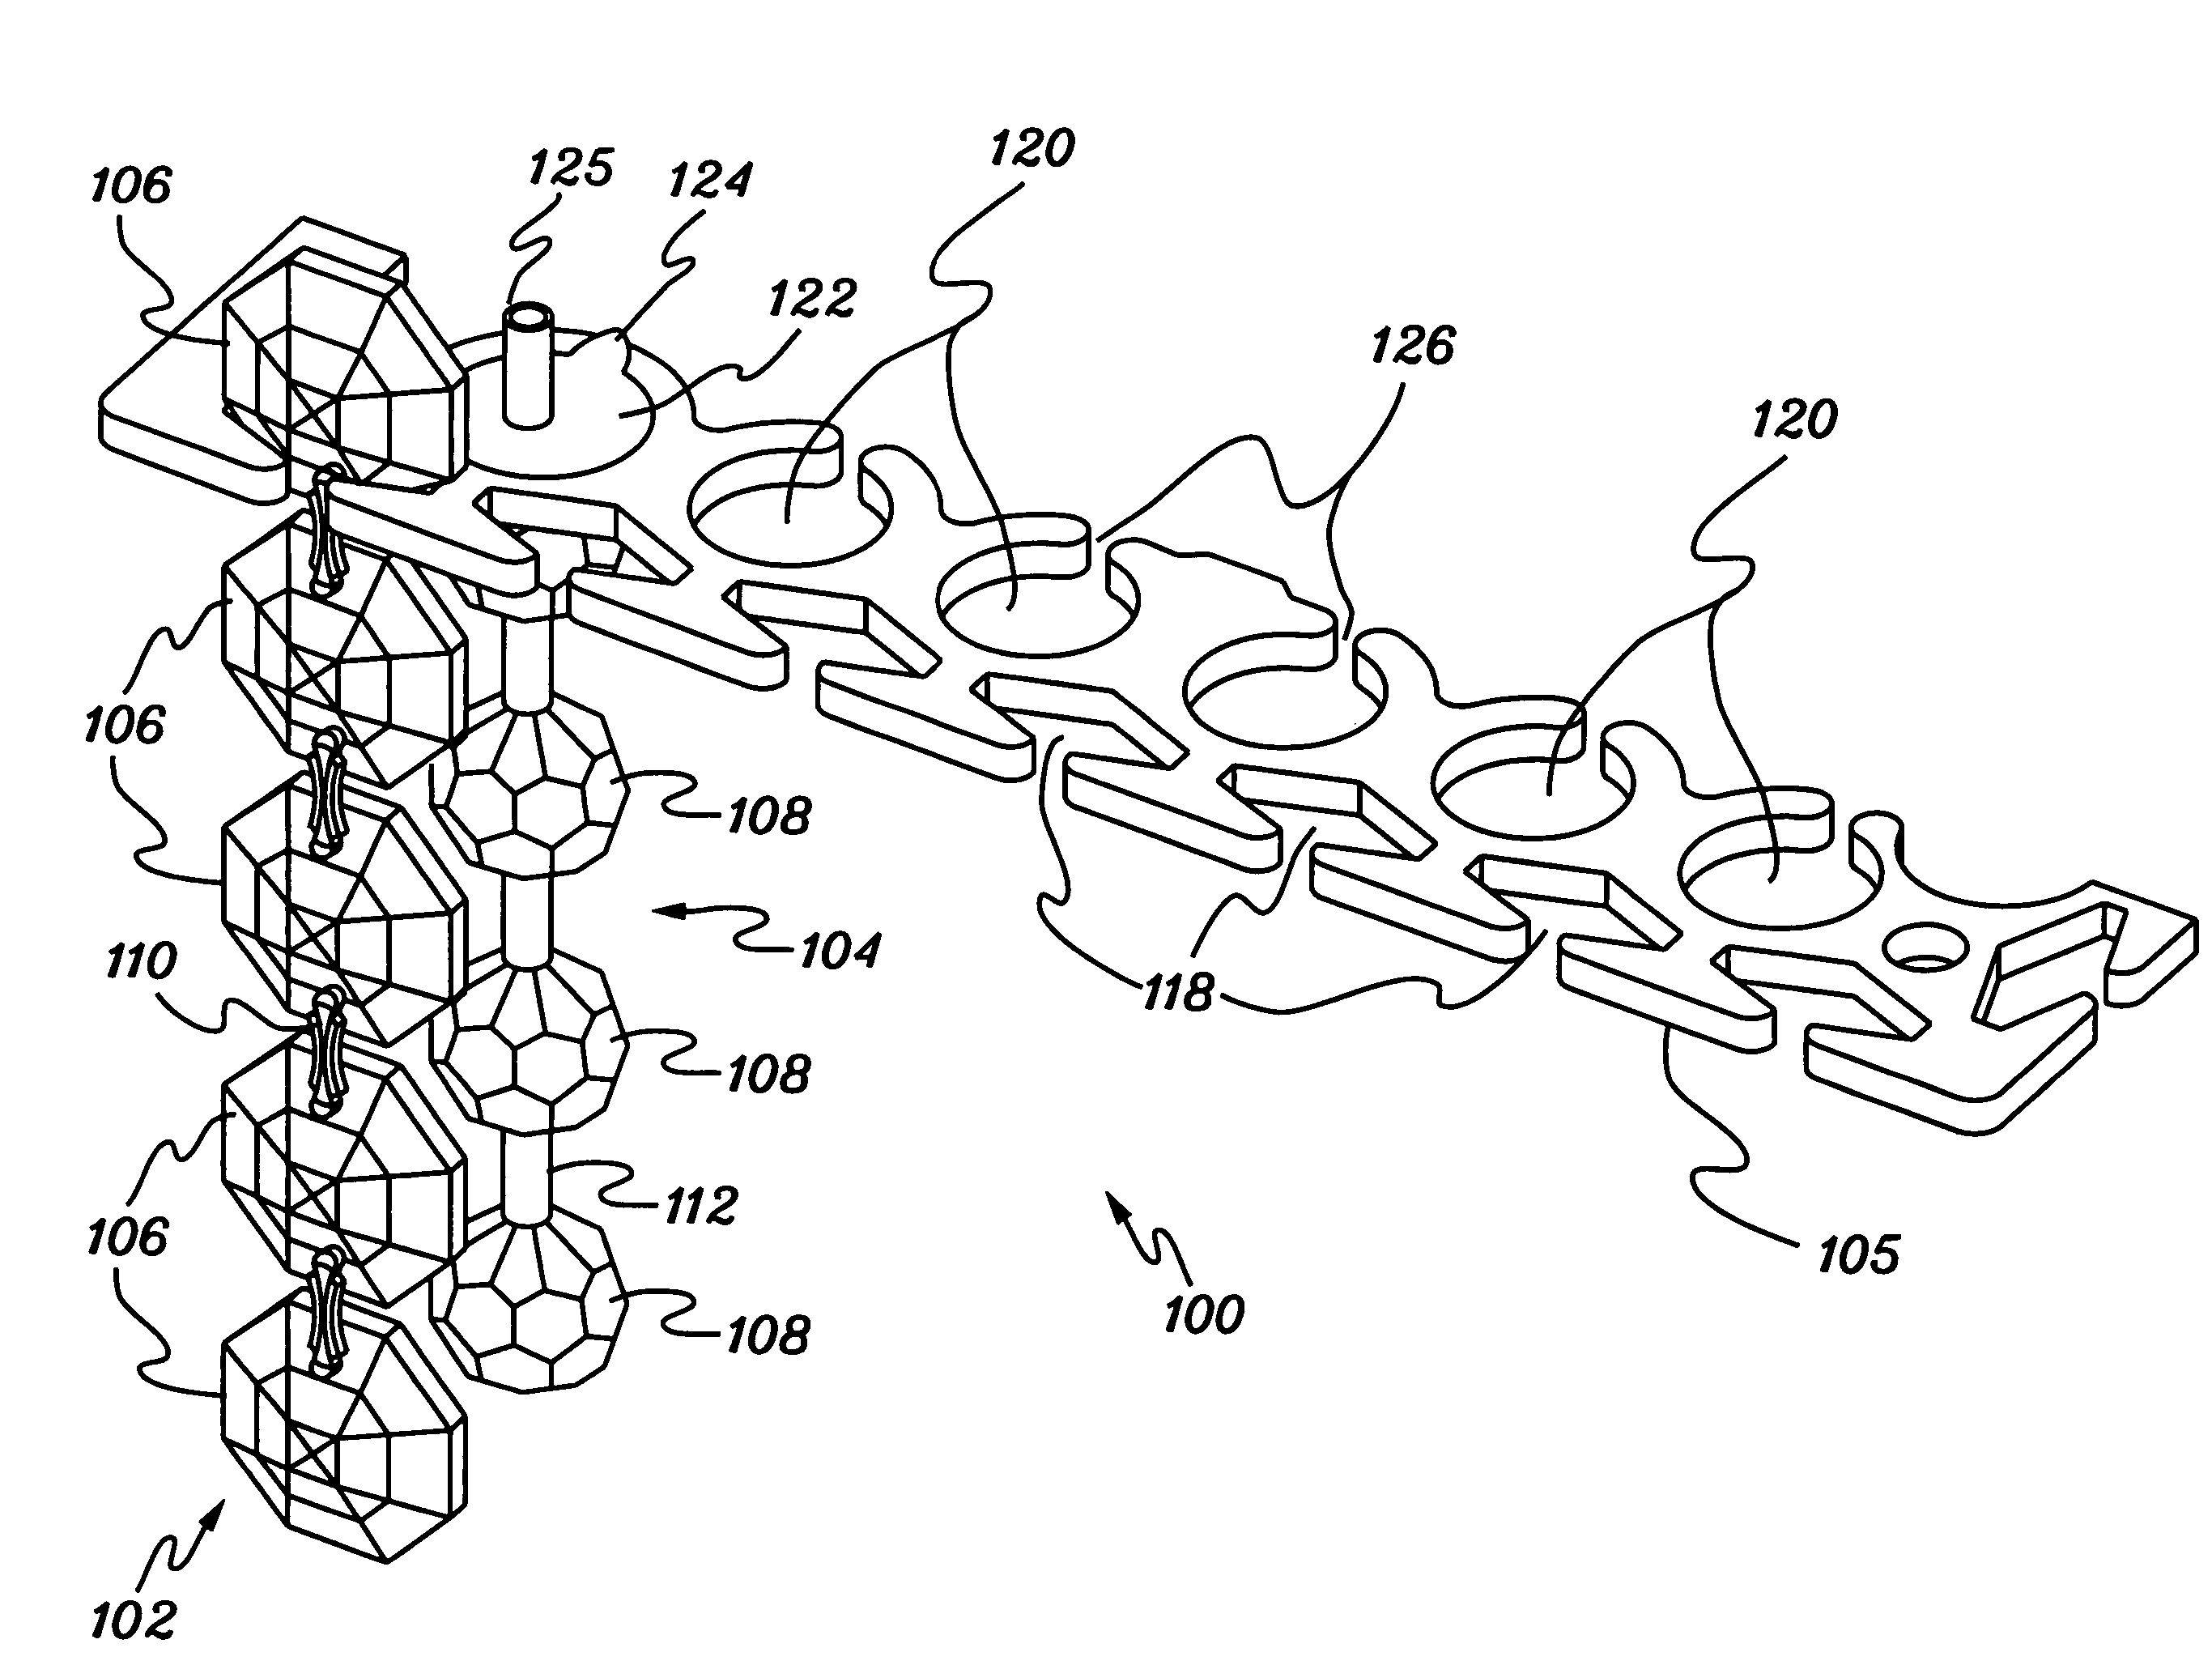 Methods and apparatus for displaying decorative ornament curtains